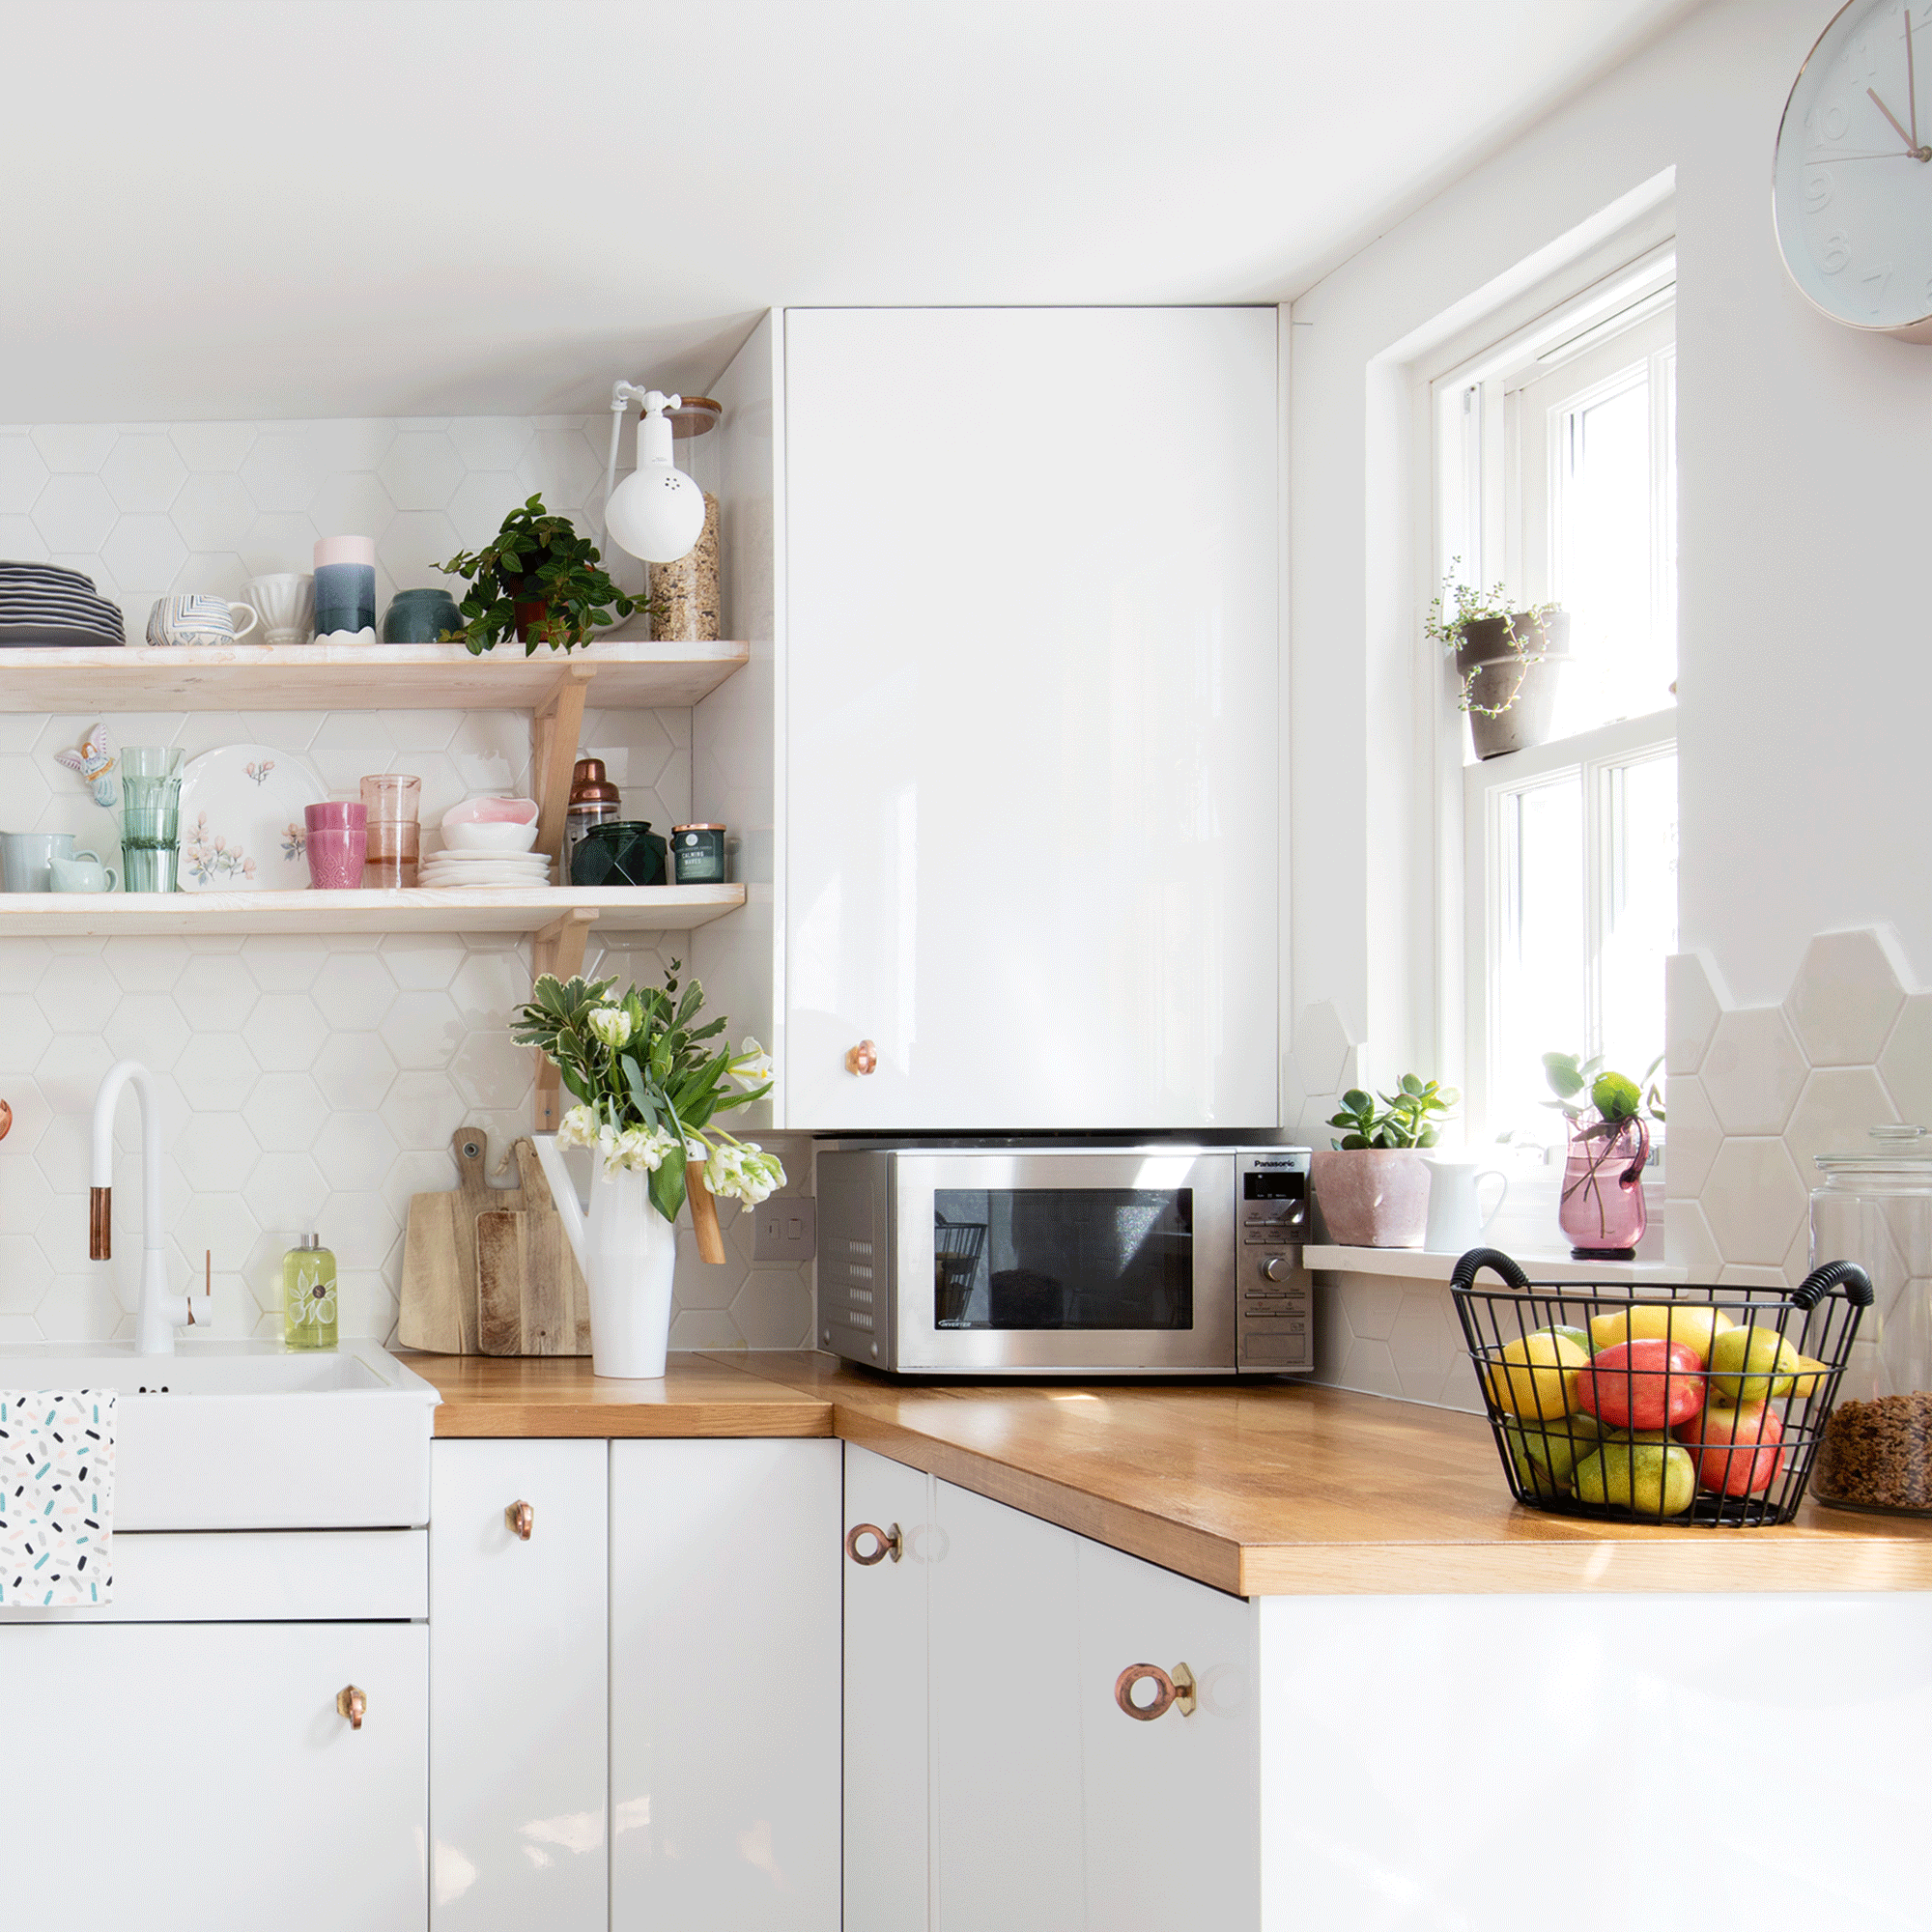 White kitchen with wooden counters and microwave